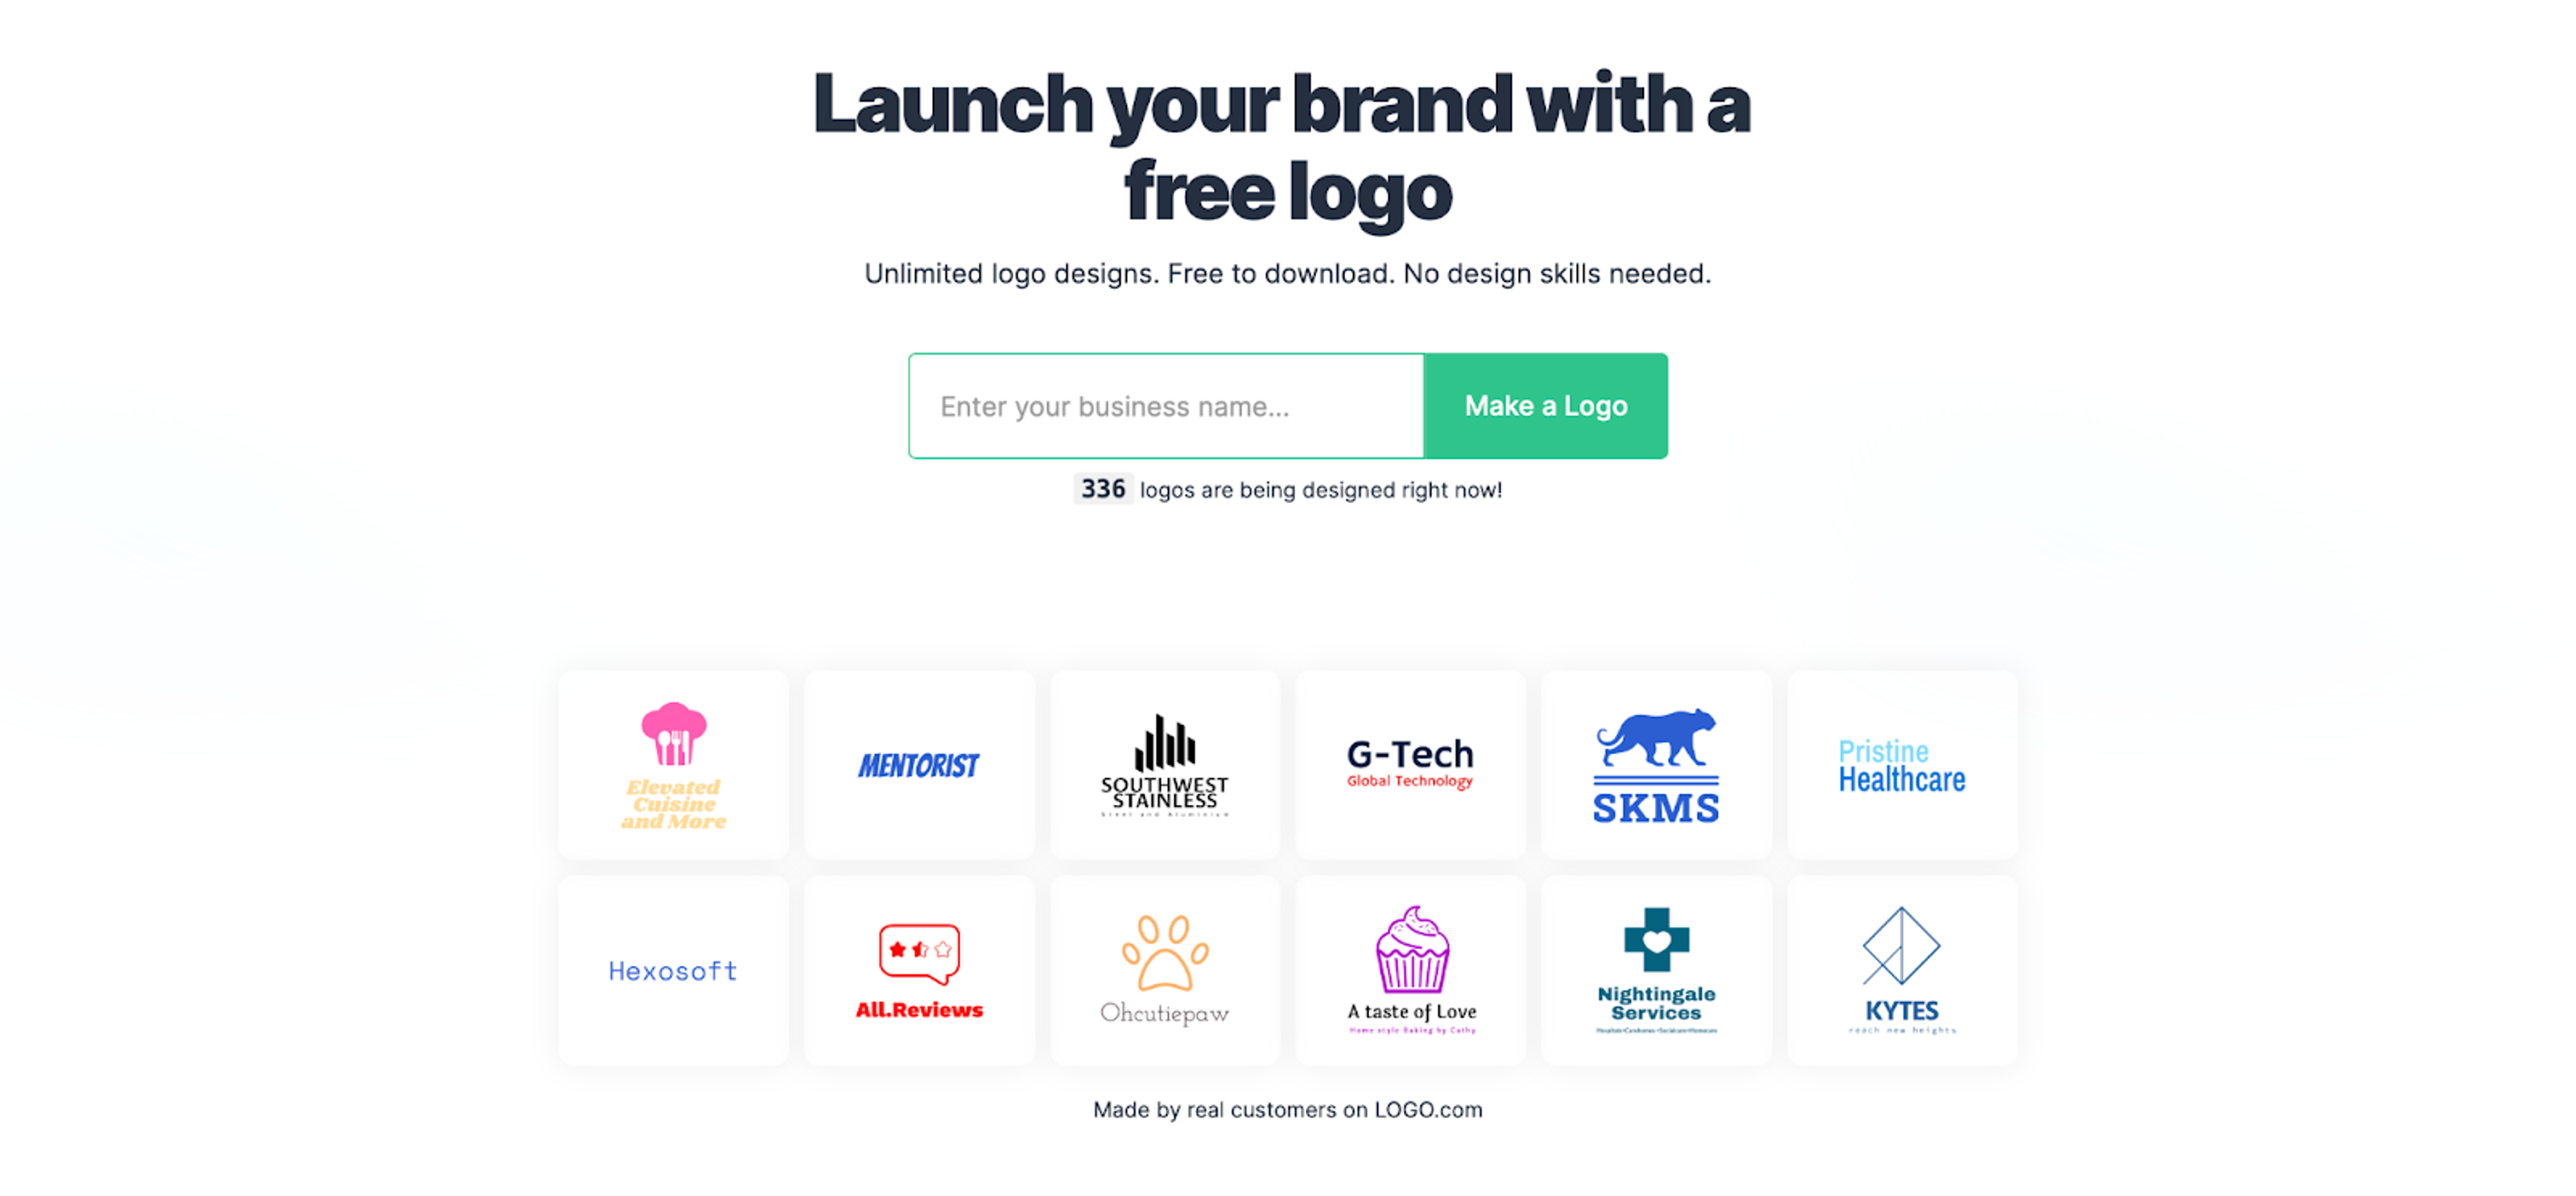 Create a gorgeous, free logo in minutes!